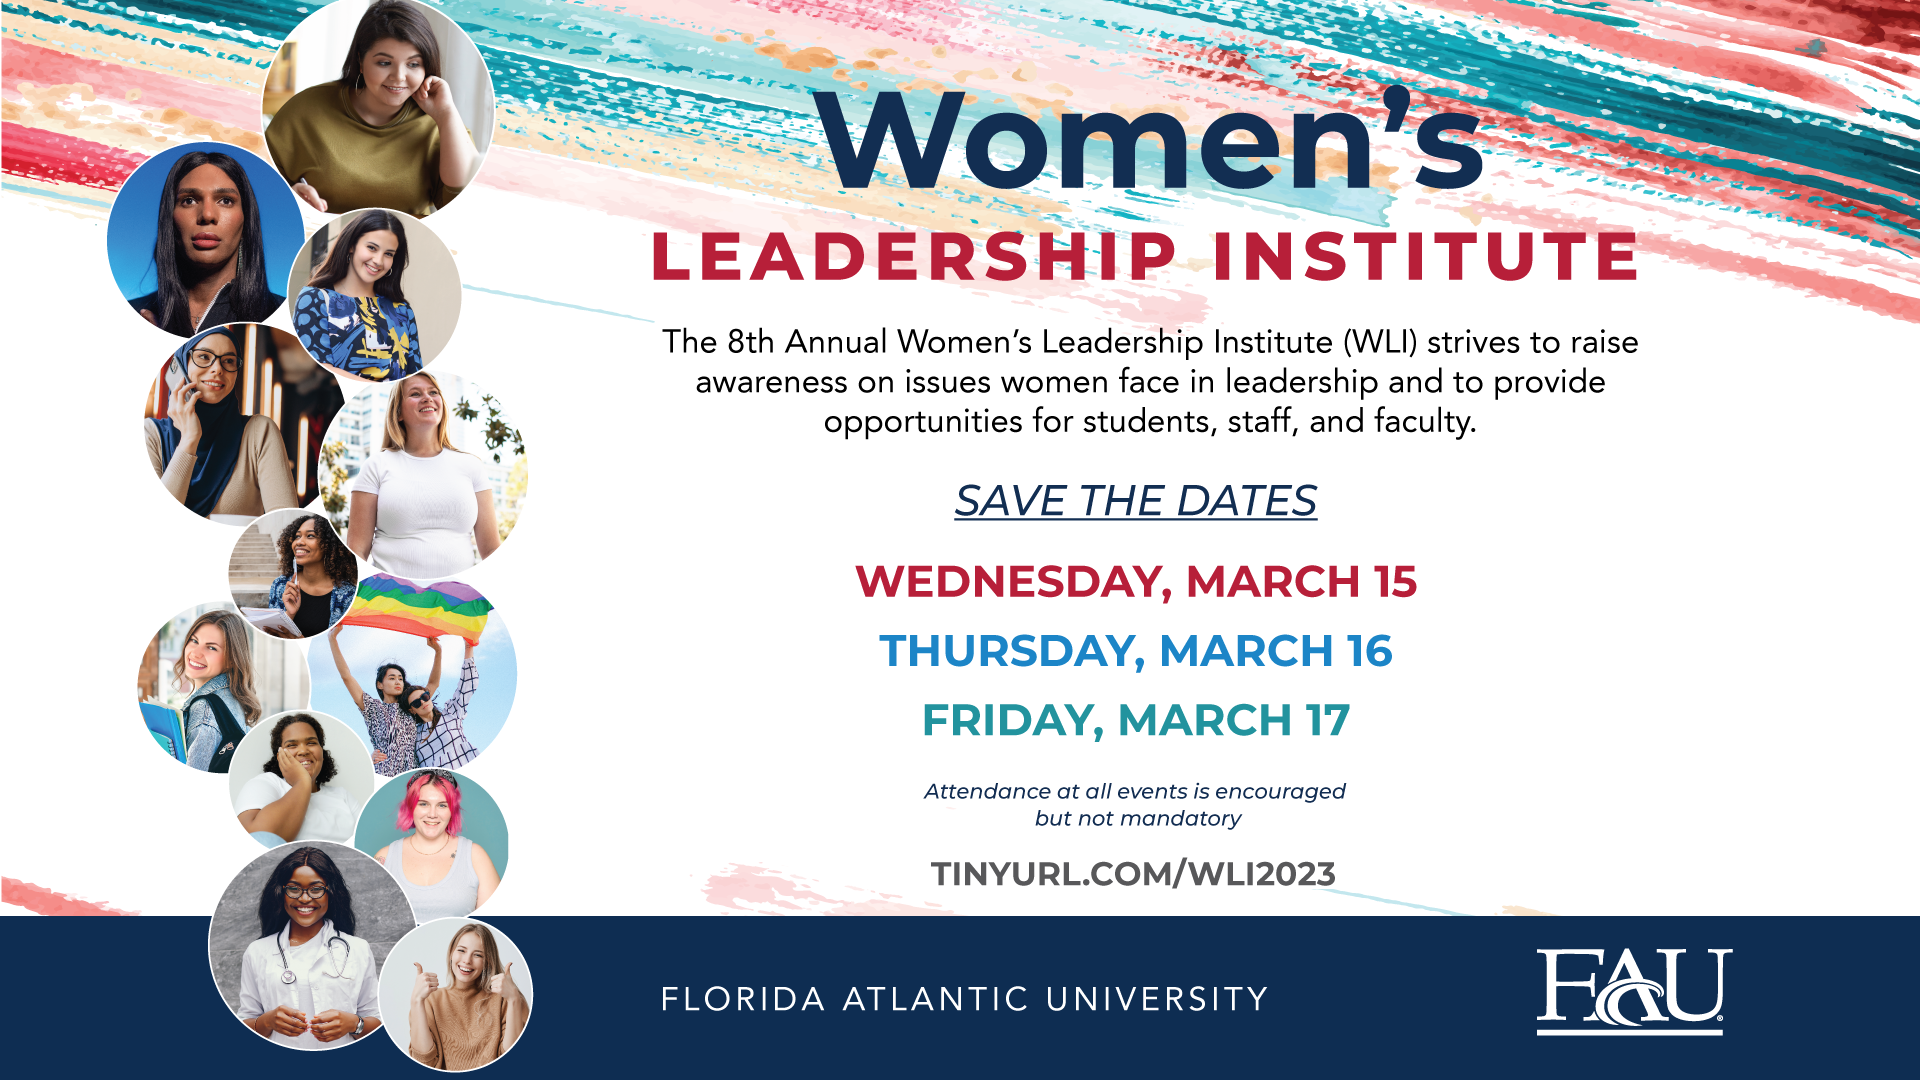 The 8th Annual Women's Leadership Institute